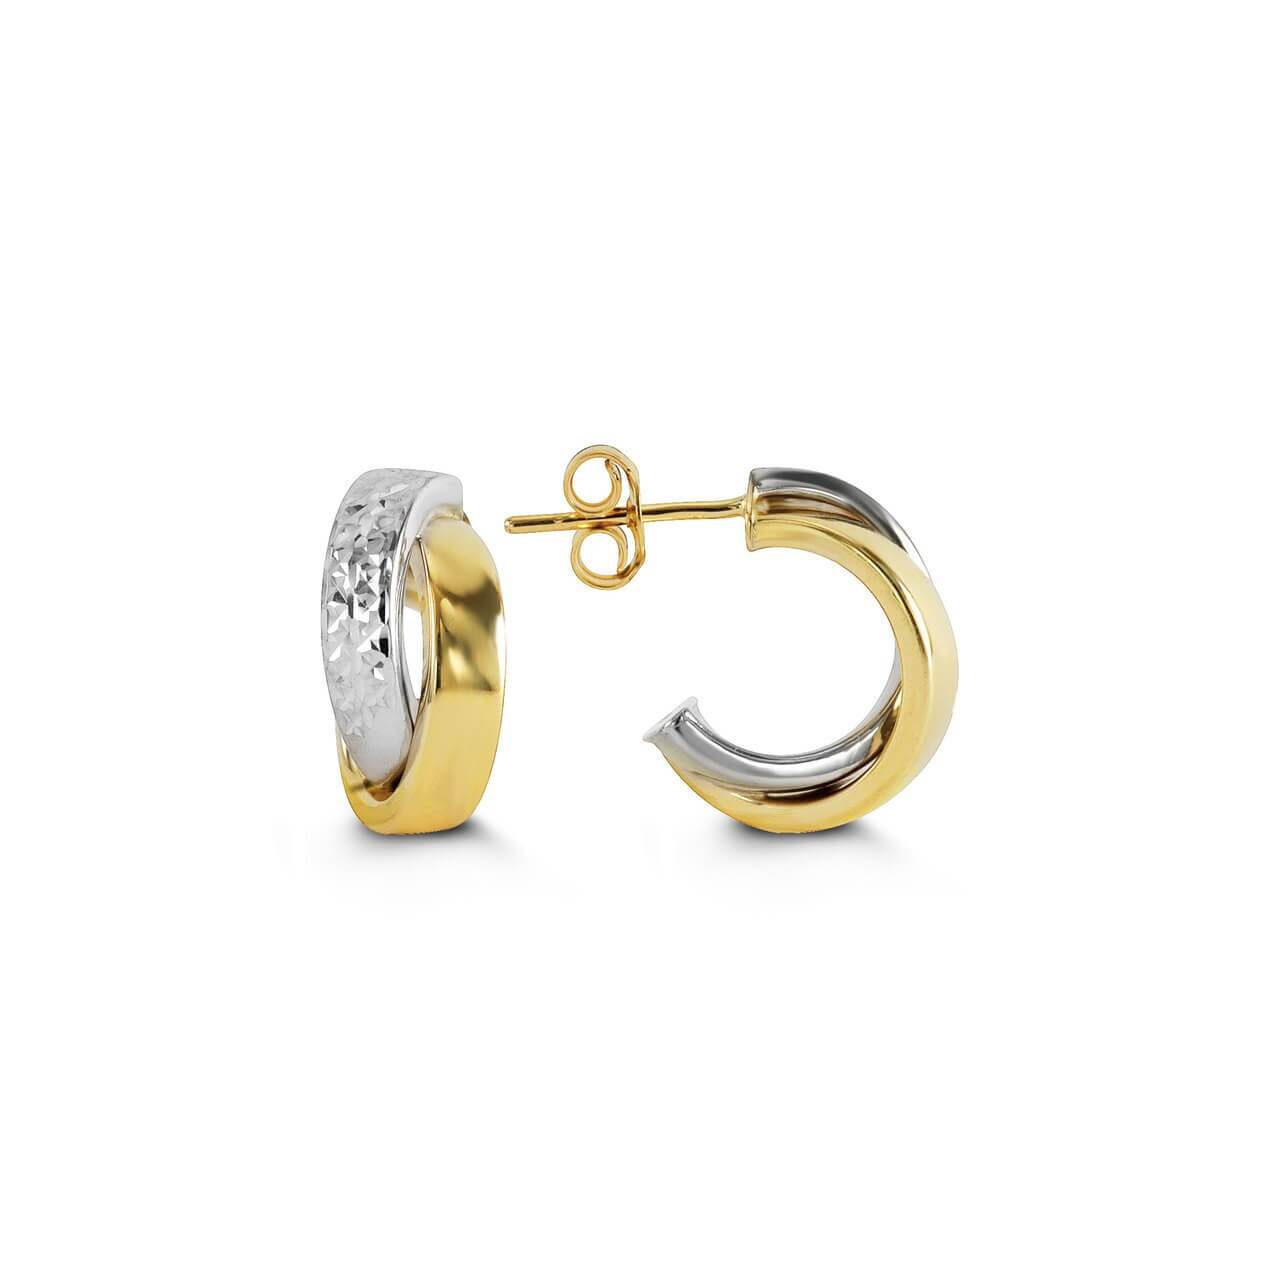 10K White And Yellow Gold X Style C Shape Stud Earrings